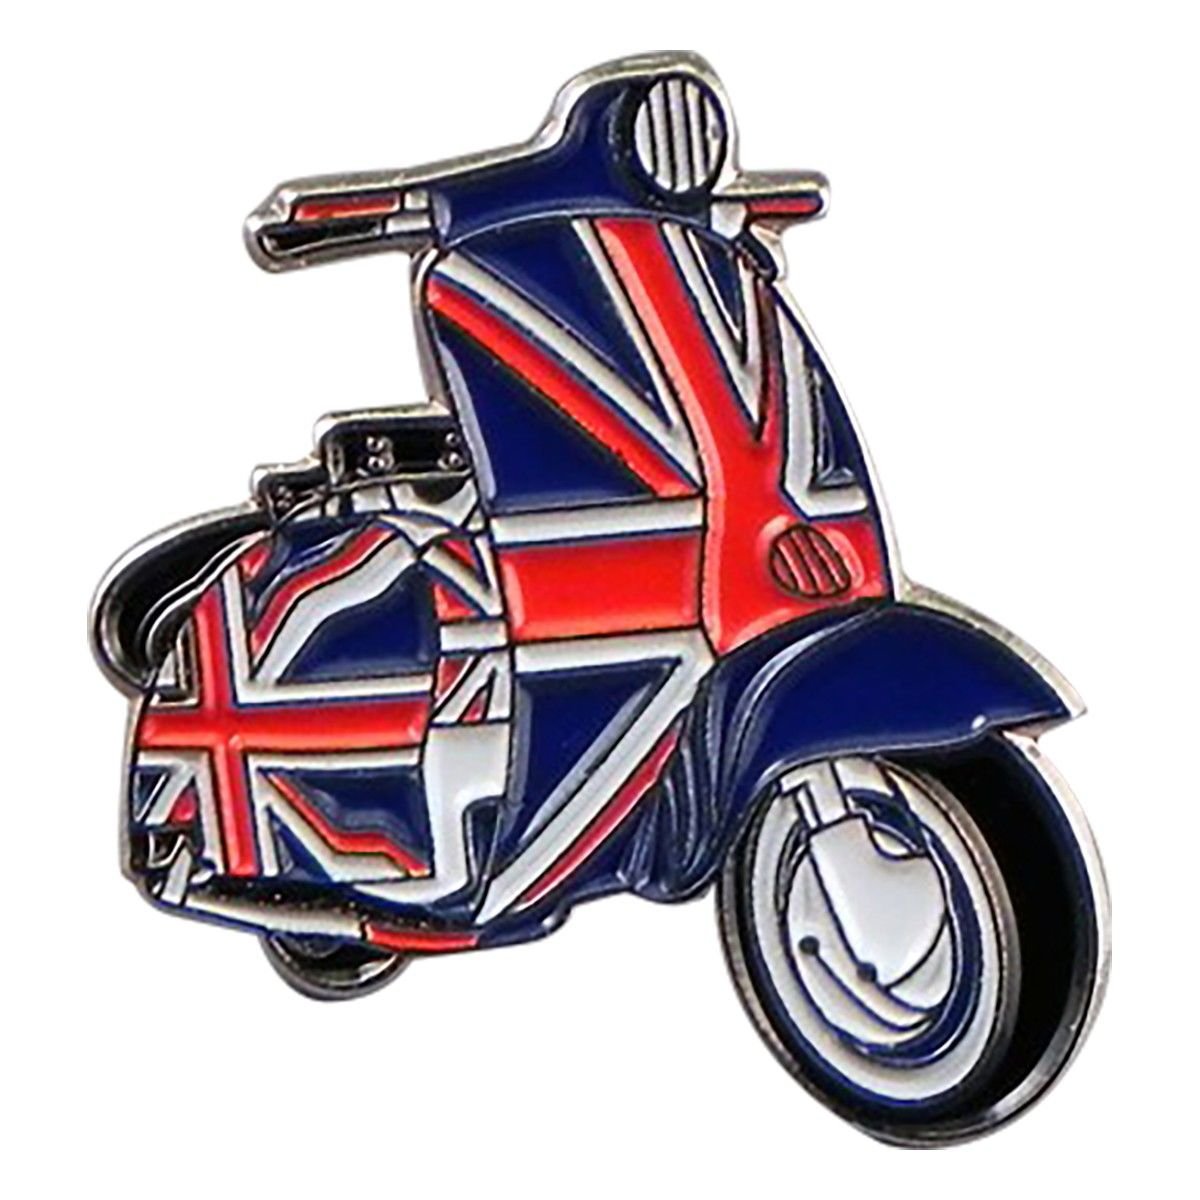 Union Jack Scooter Pin - Reversnål fra The Prince's Own hos The Prince Webshop